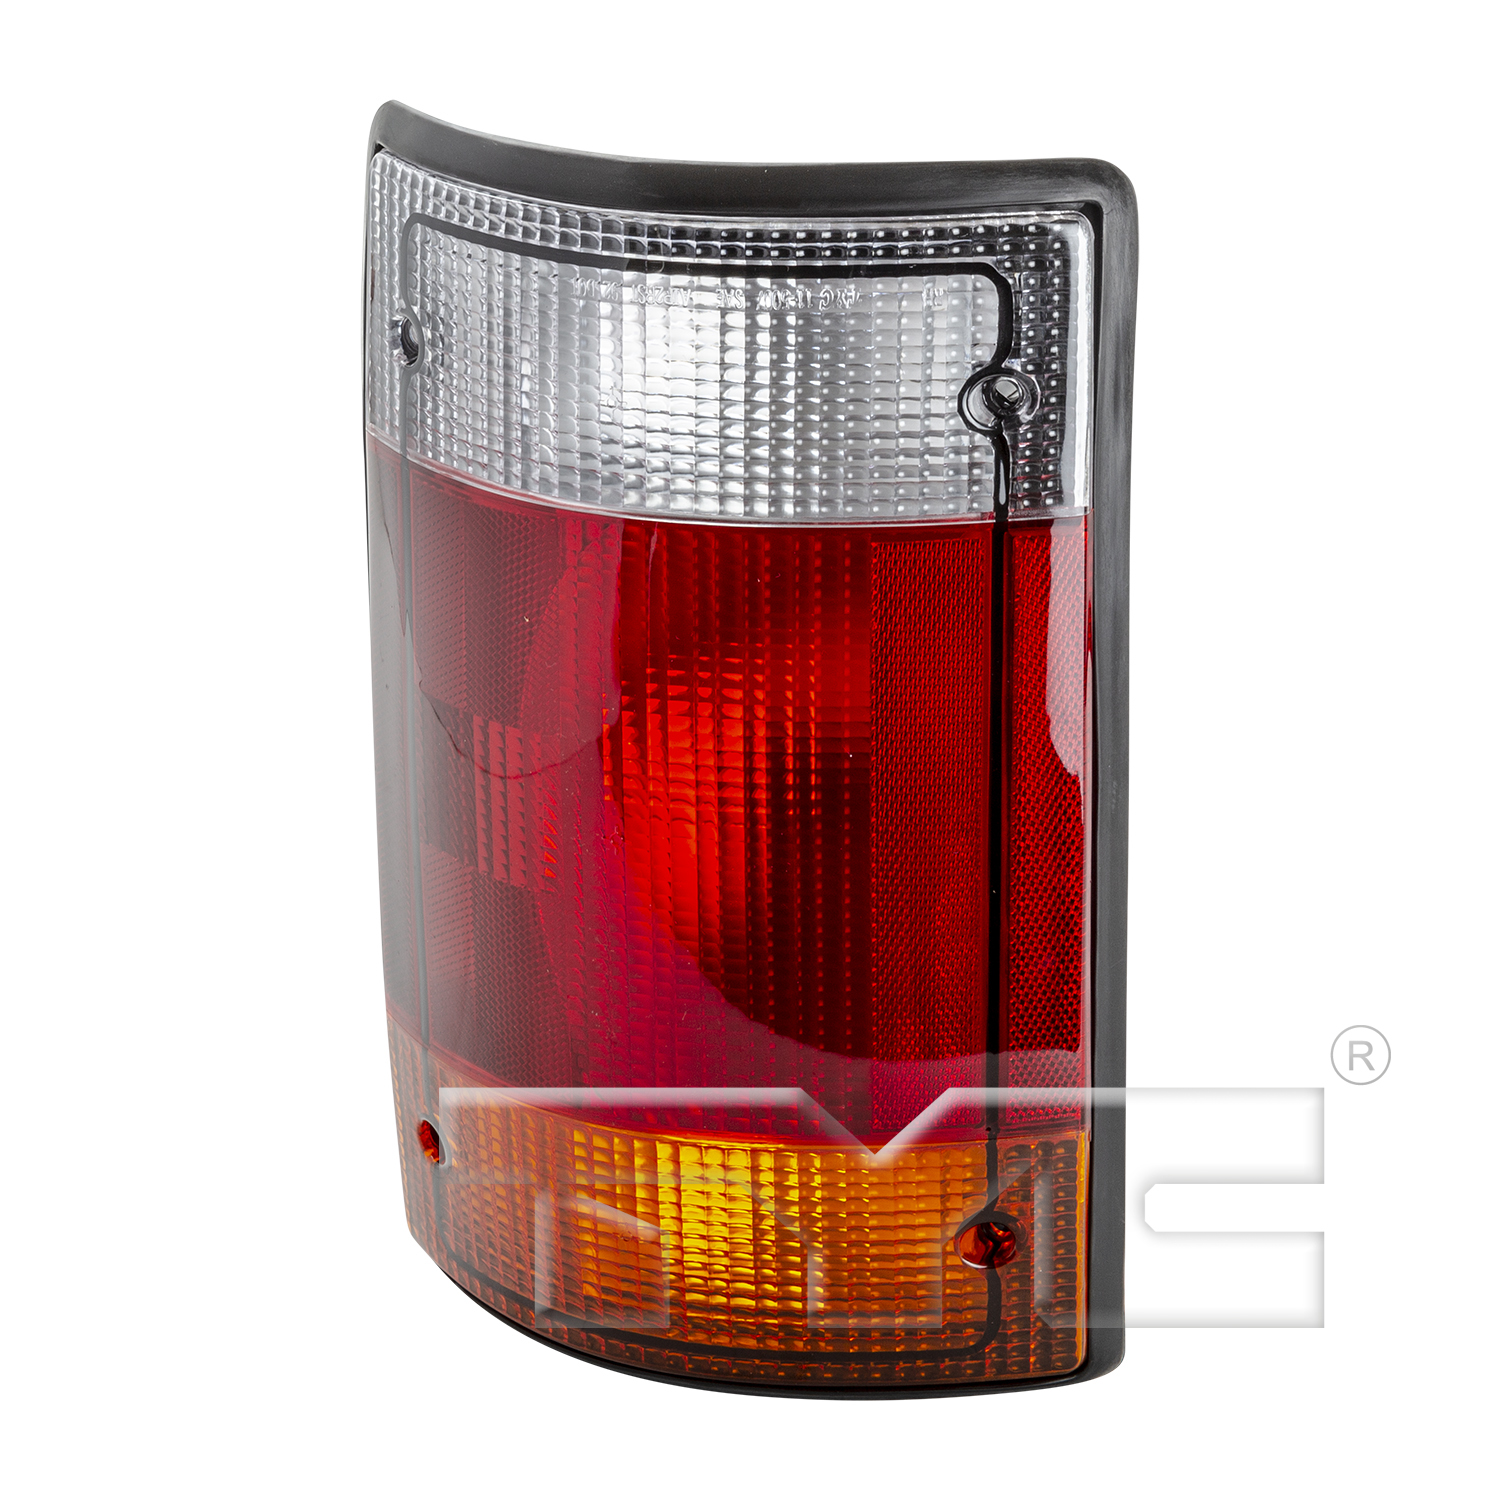 Aftermarket TAILLIGHTS for FORD - E-350 ECONOLINE CLUB WAGON, E-350 ECONOLINE CLUB WAGON,92-94,RT Taillamp assy